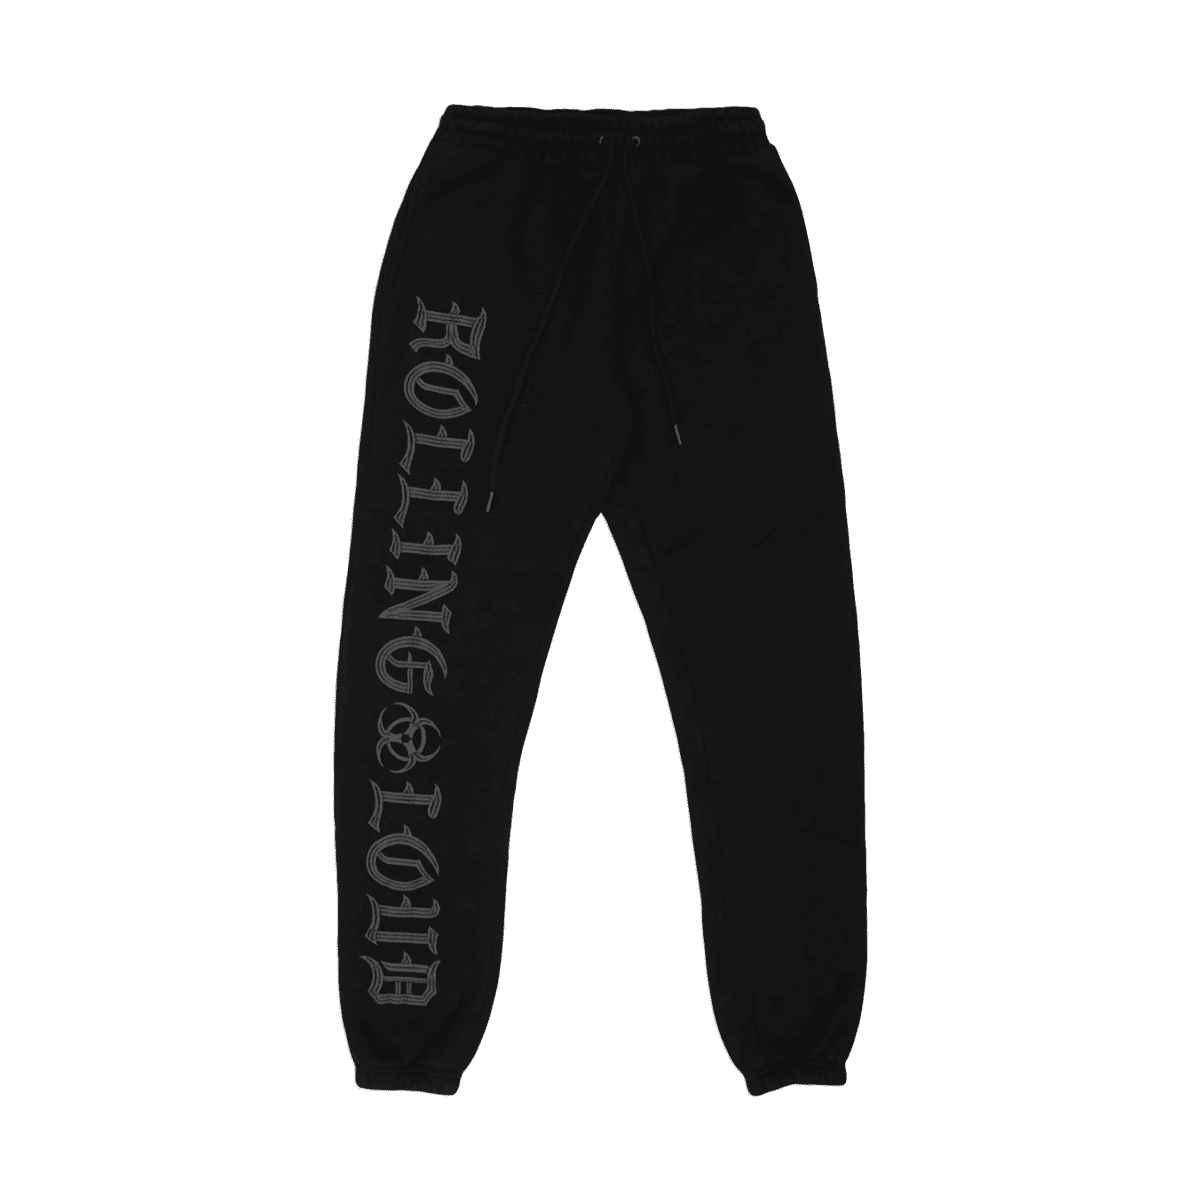 OE Heavyweight Embroidered Black Sweatpants – Rolling Loud